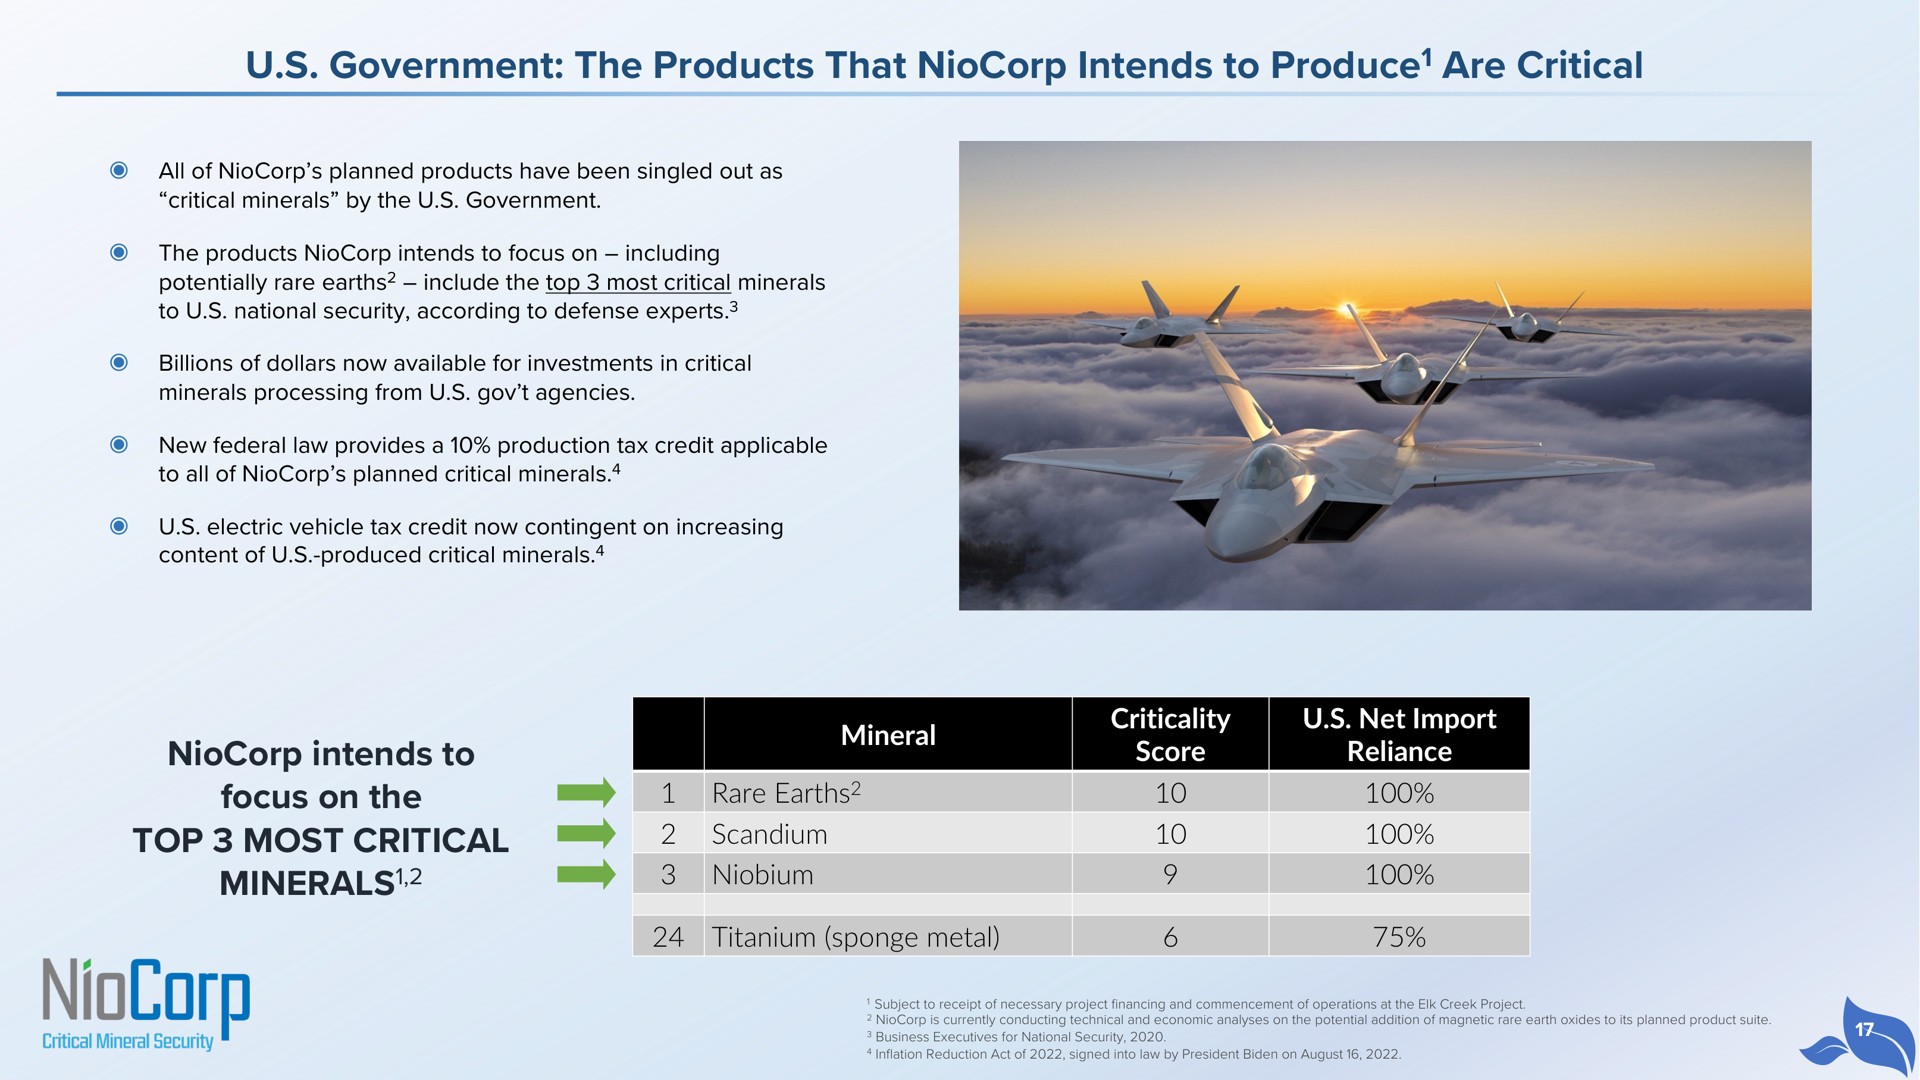 government the products that intends to produce are critical intends to focus on the top most critical minerals produce a minerals rare earths scandium niobium bile ore | NioCorp